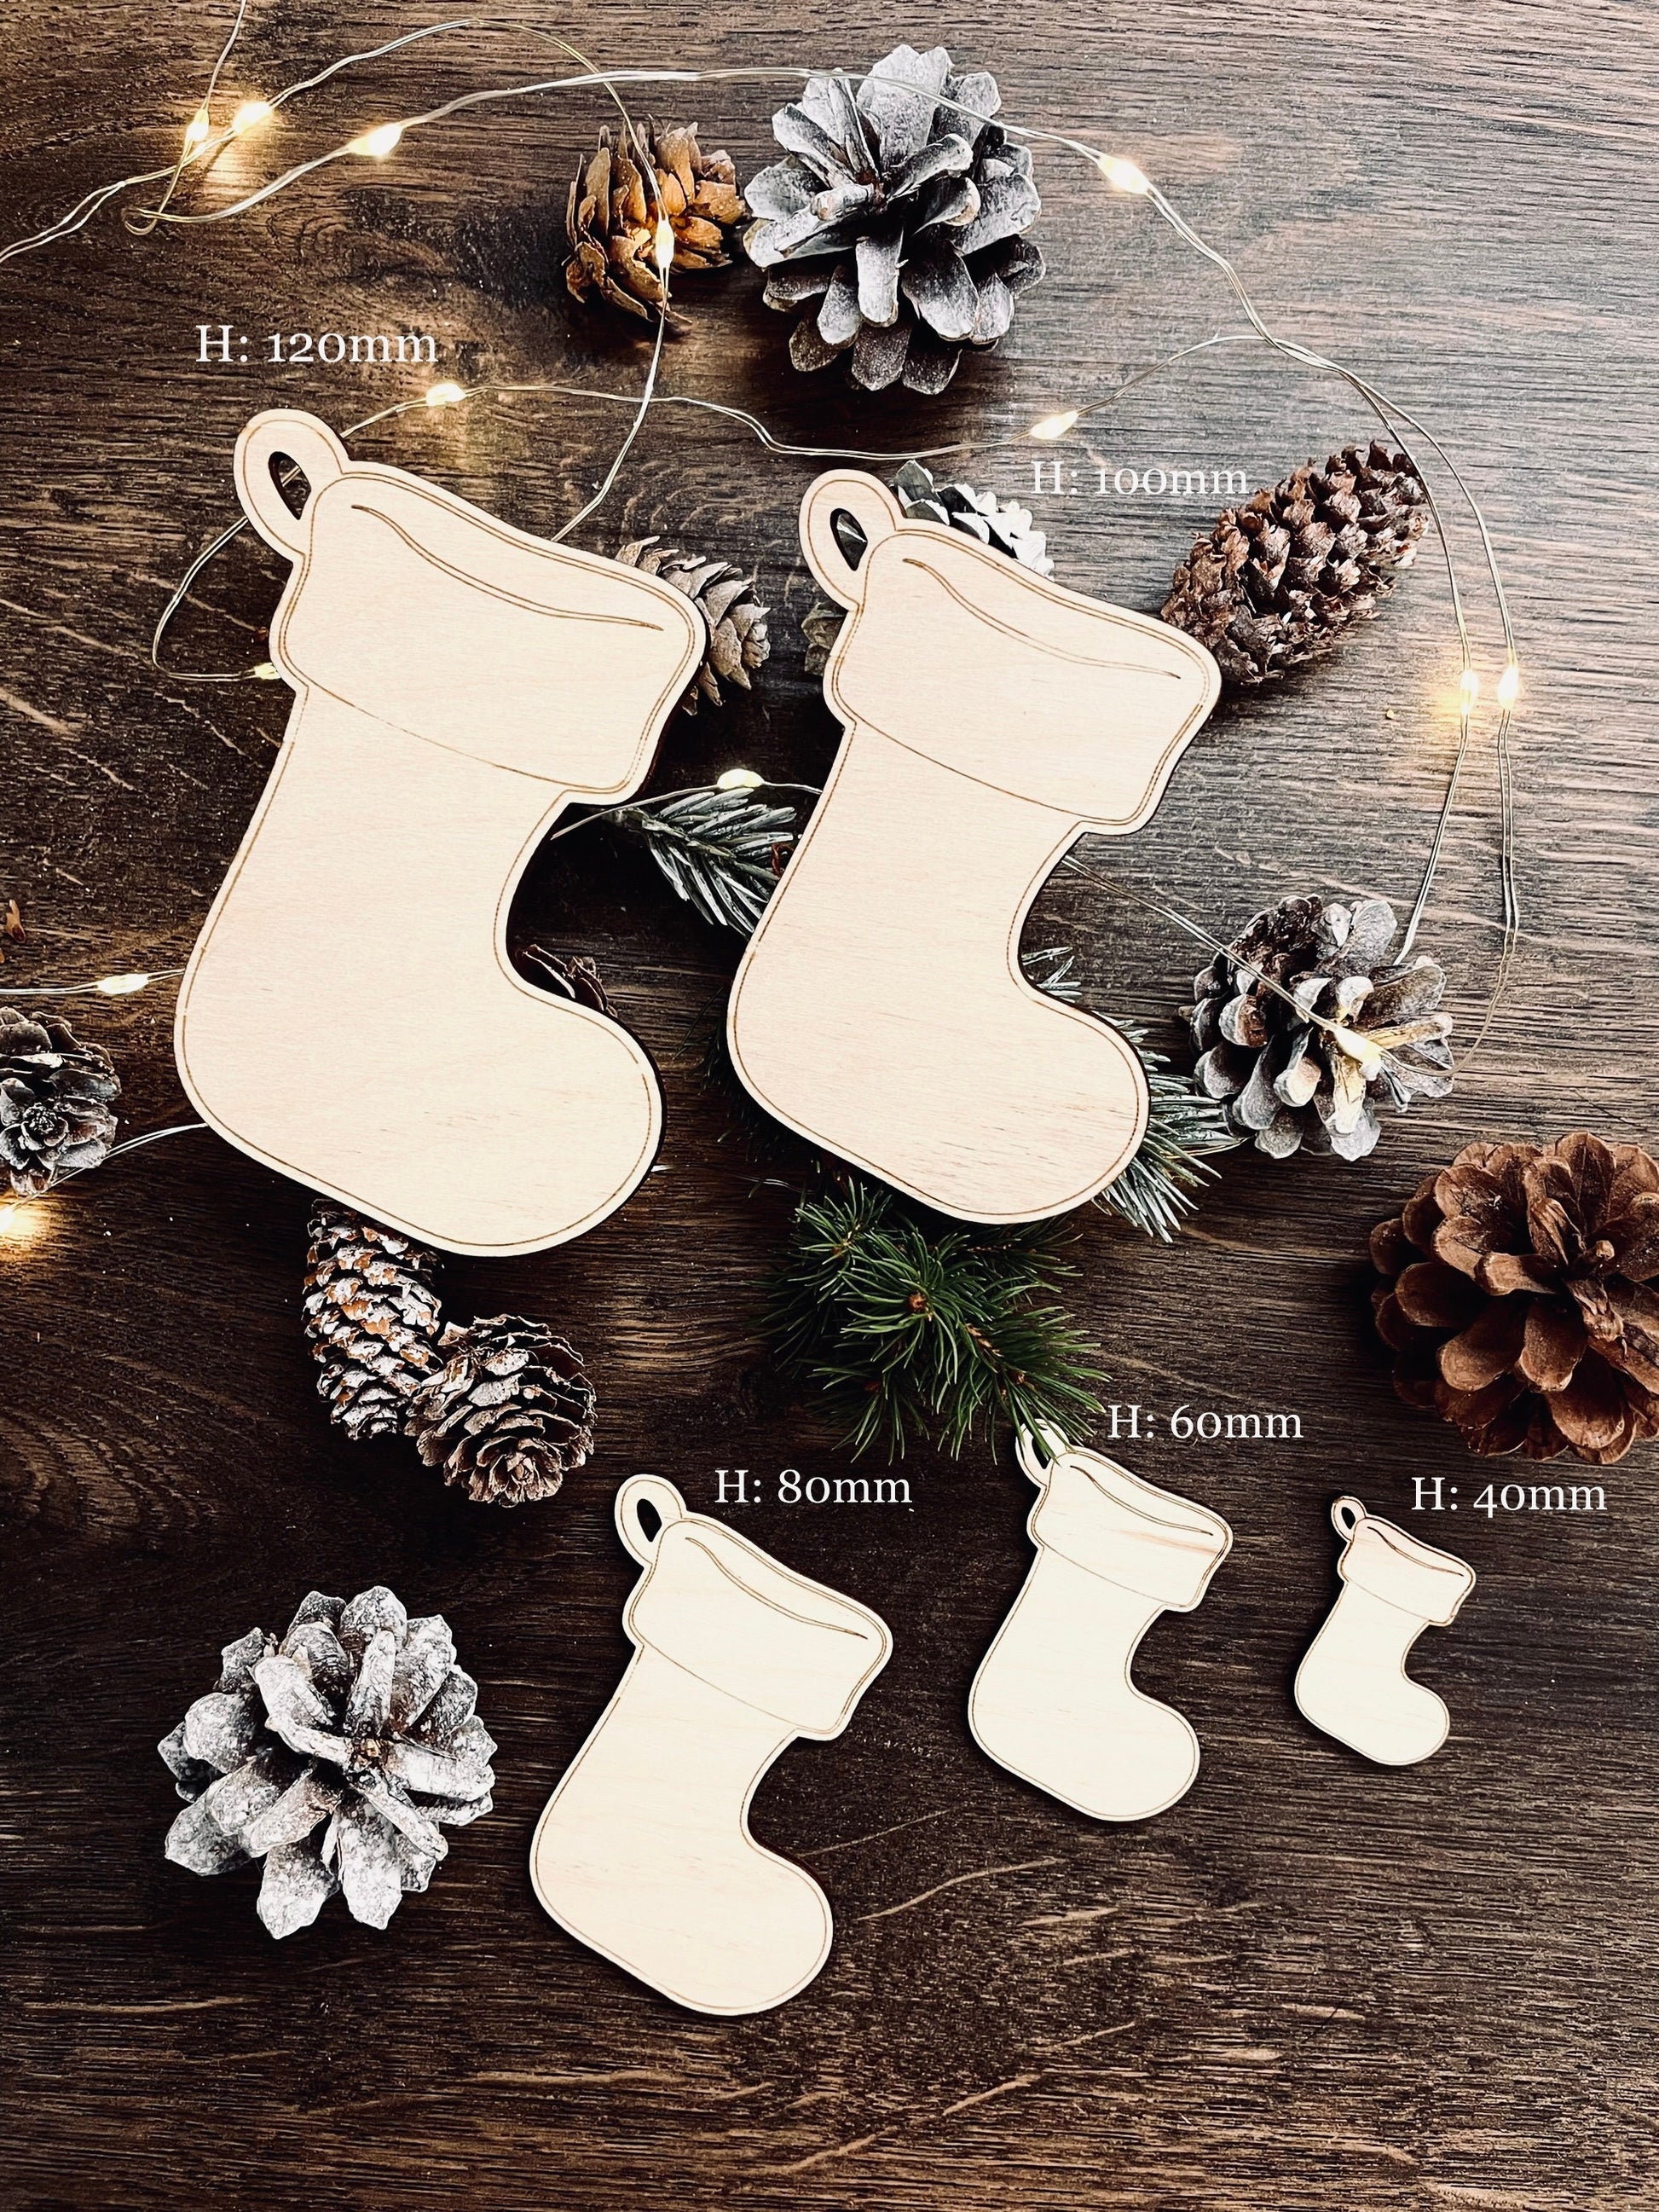 10x Wooden Nordic Christmas Stocking Shapes, Christmas Crafts | Christmas Decor made from Laser Cut Plywood Blanks